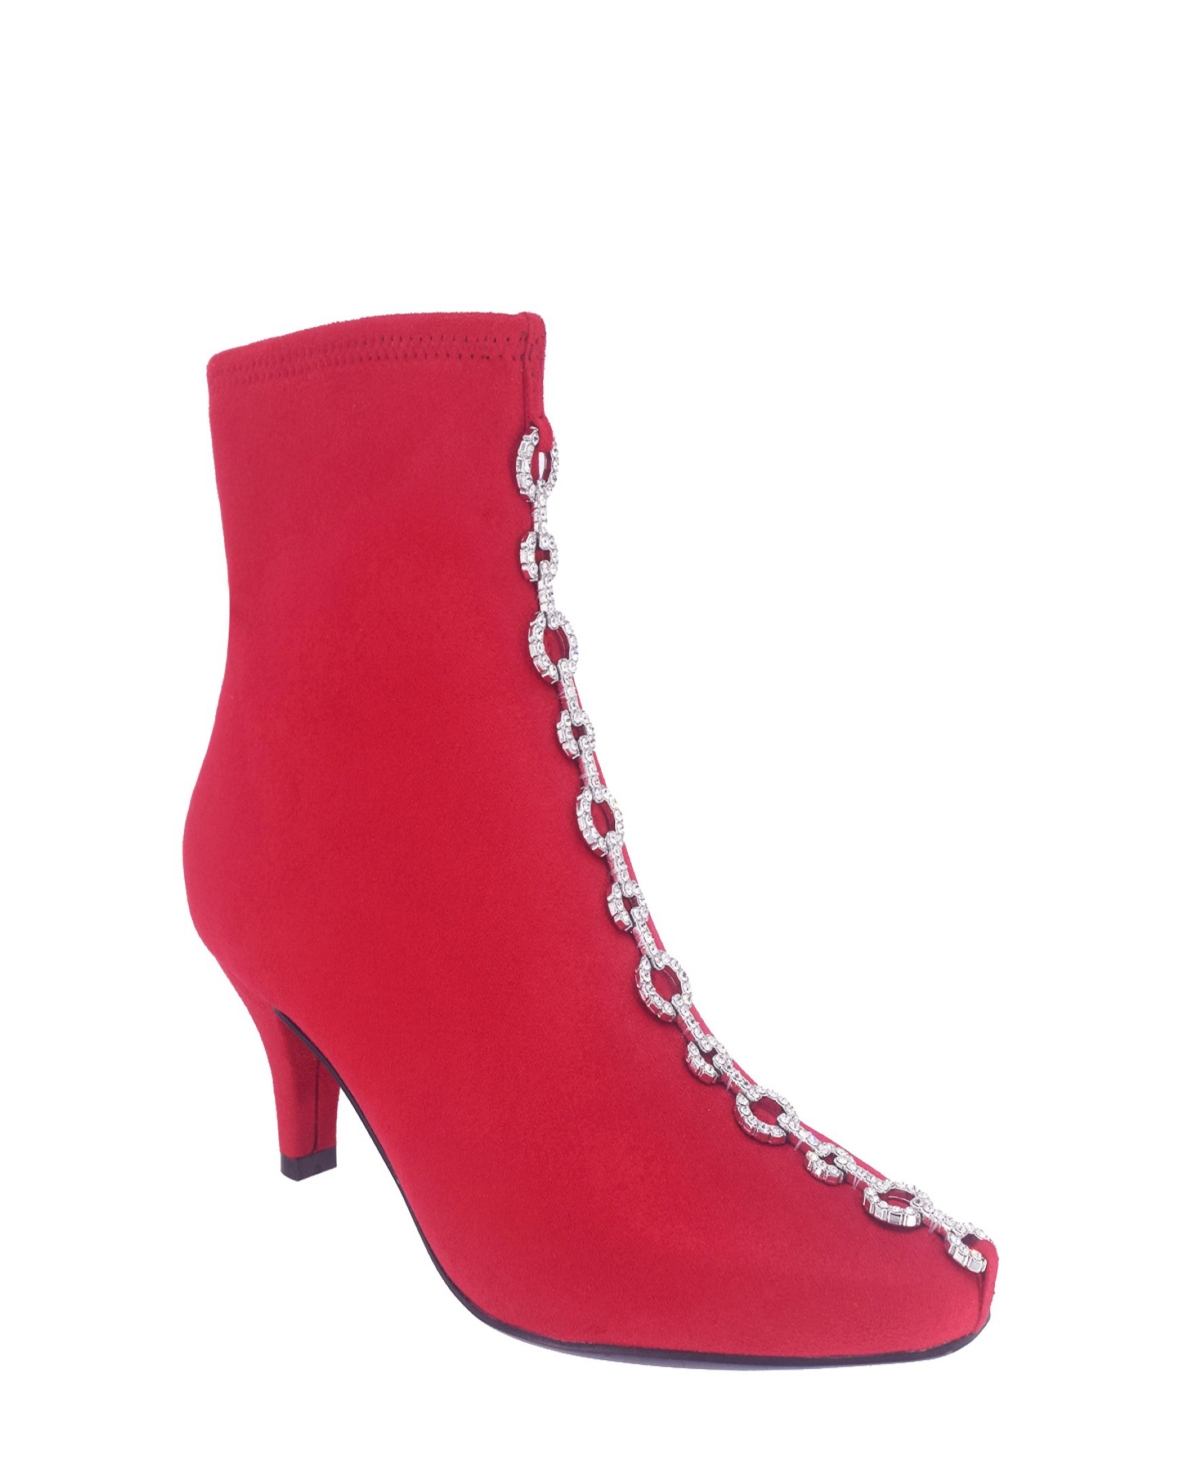 Women's Naja Chain I Stretch Ankle Booties - Classic Red